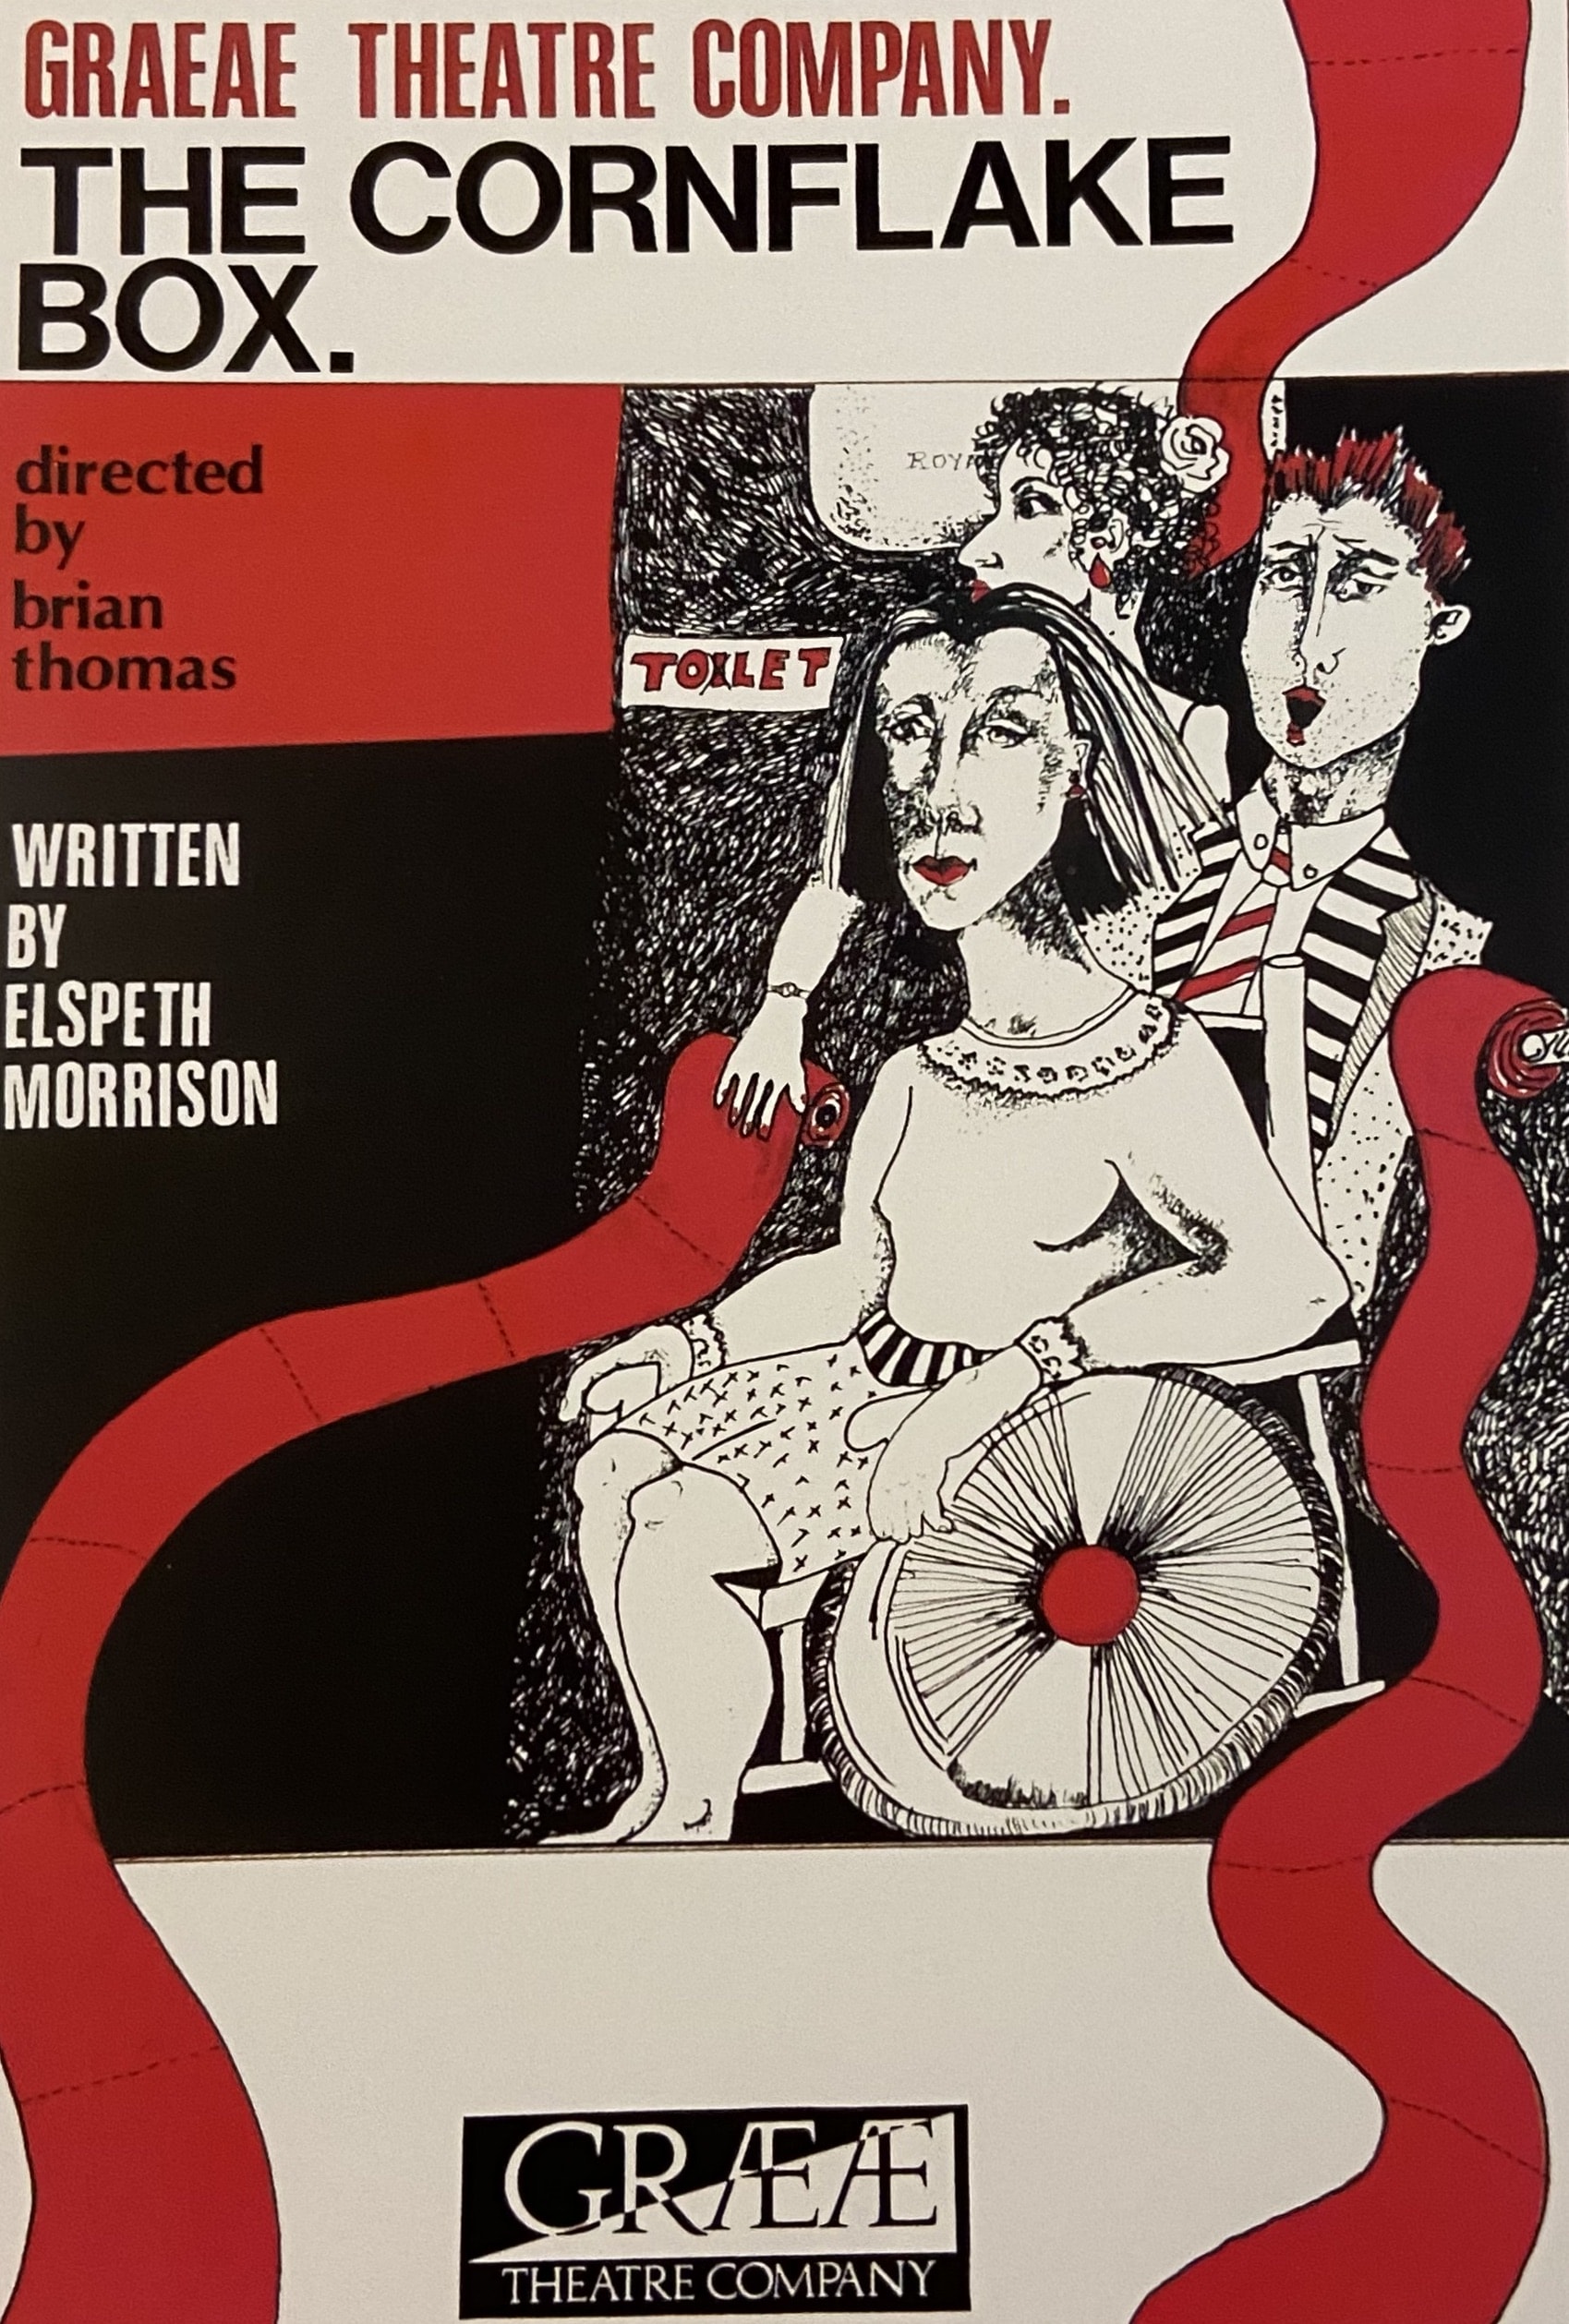 A poster for Graeae's production of 'The Cornflake Box'. The poster is white, red, and black, and shows an illustration of three characters - one of which is using a wheelchair. The text on the poster is a mixture of red, black, and white, and reads 